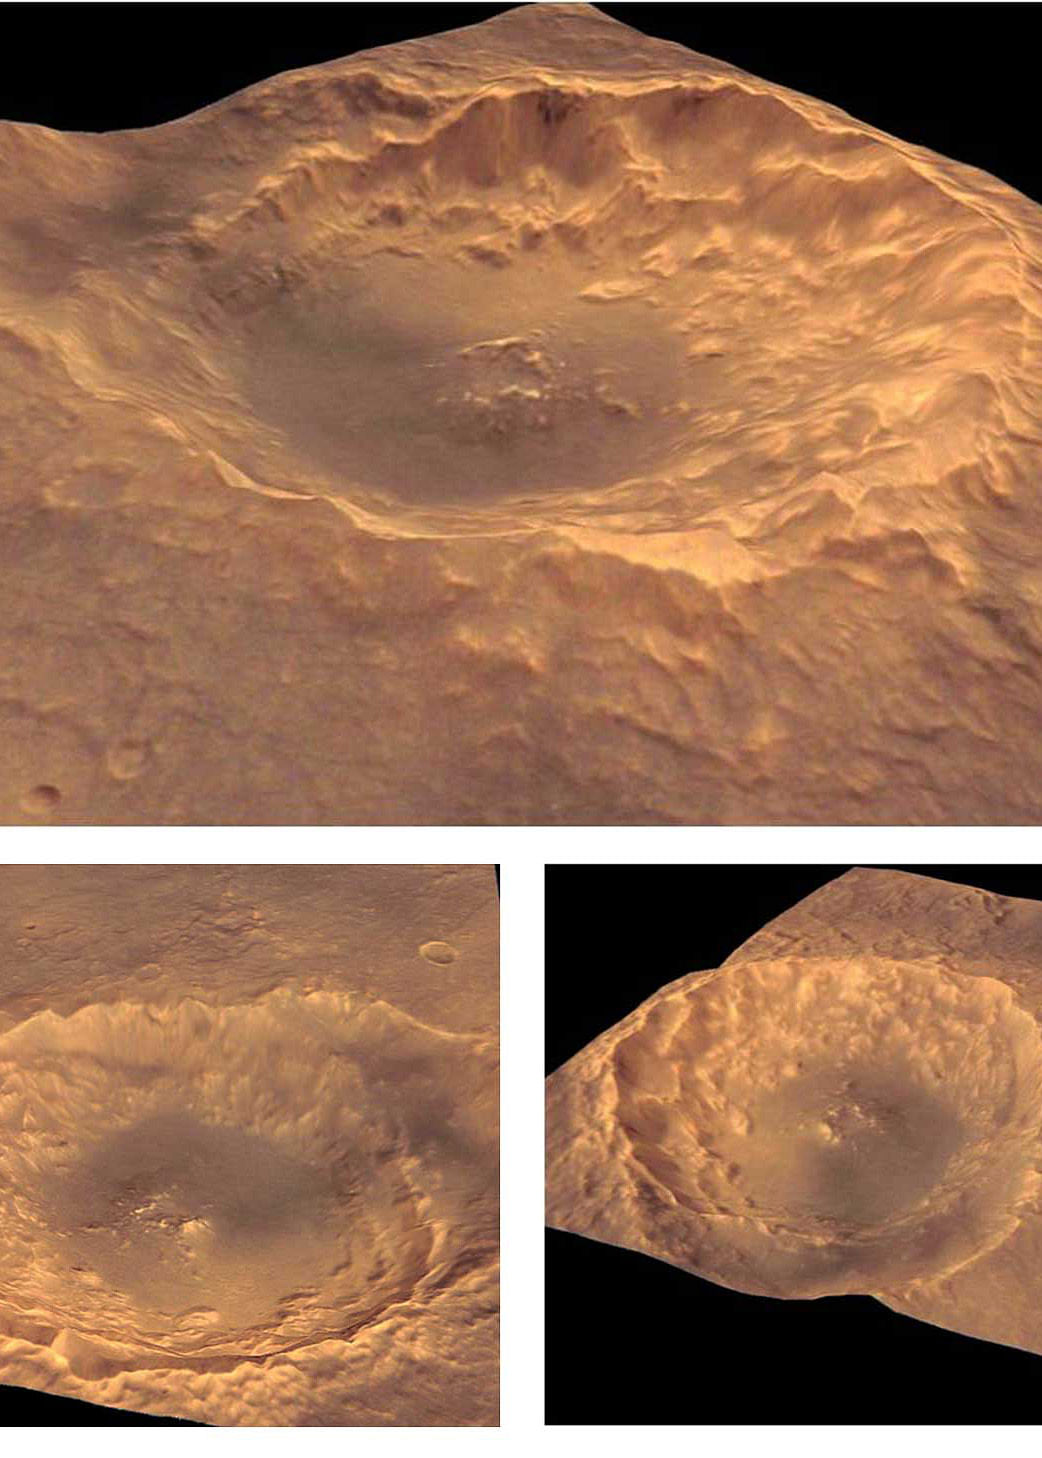 Mangalyaan has sent back some amazing pictures of the Ophir Chasma terrain on Mars.